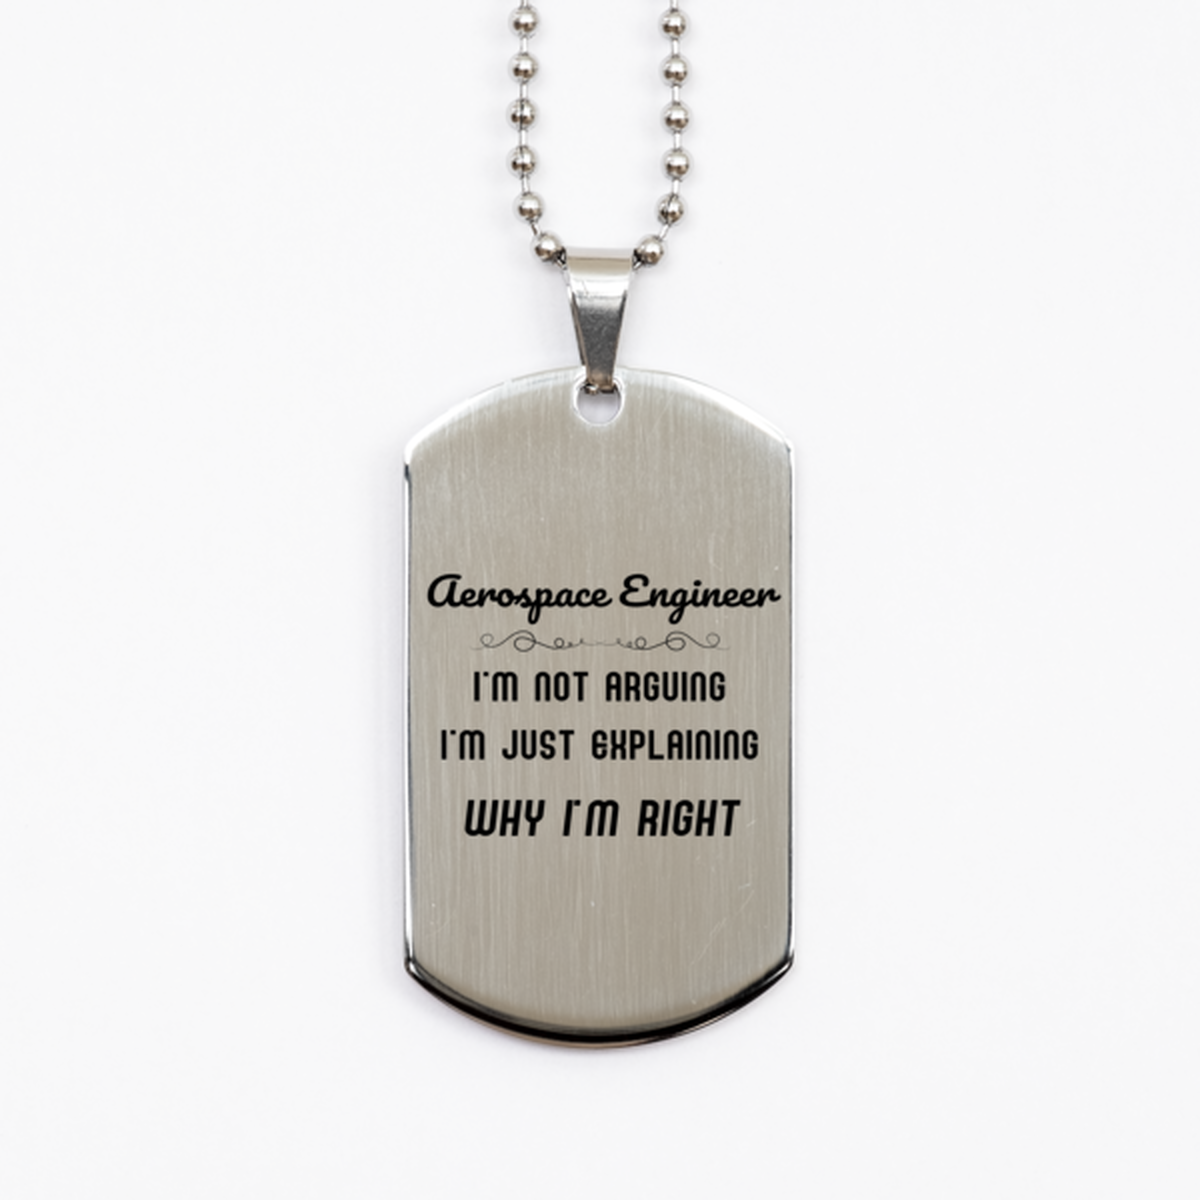 Aerospace Engineer I'm not Arguing. I'm Just Explaining Why I'm RIGHT Silver Dog Tag, Funny Saying Quote Aerospace Engineer Gifts For Aerospace Engineer Graduation Birthday Christmas Gifts for Men Women Coworker